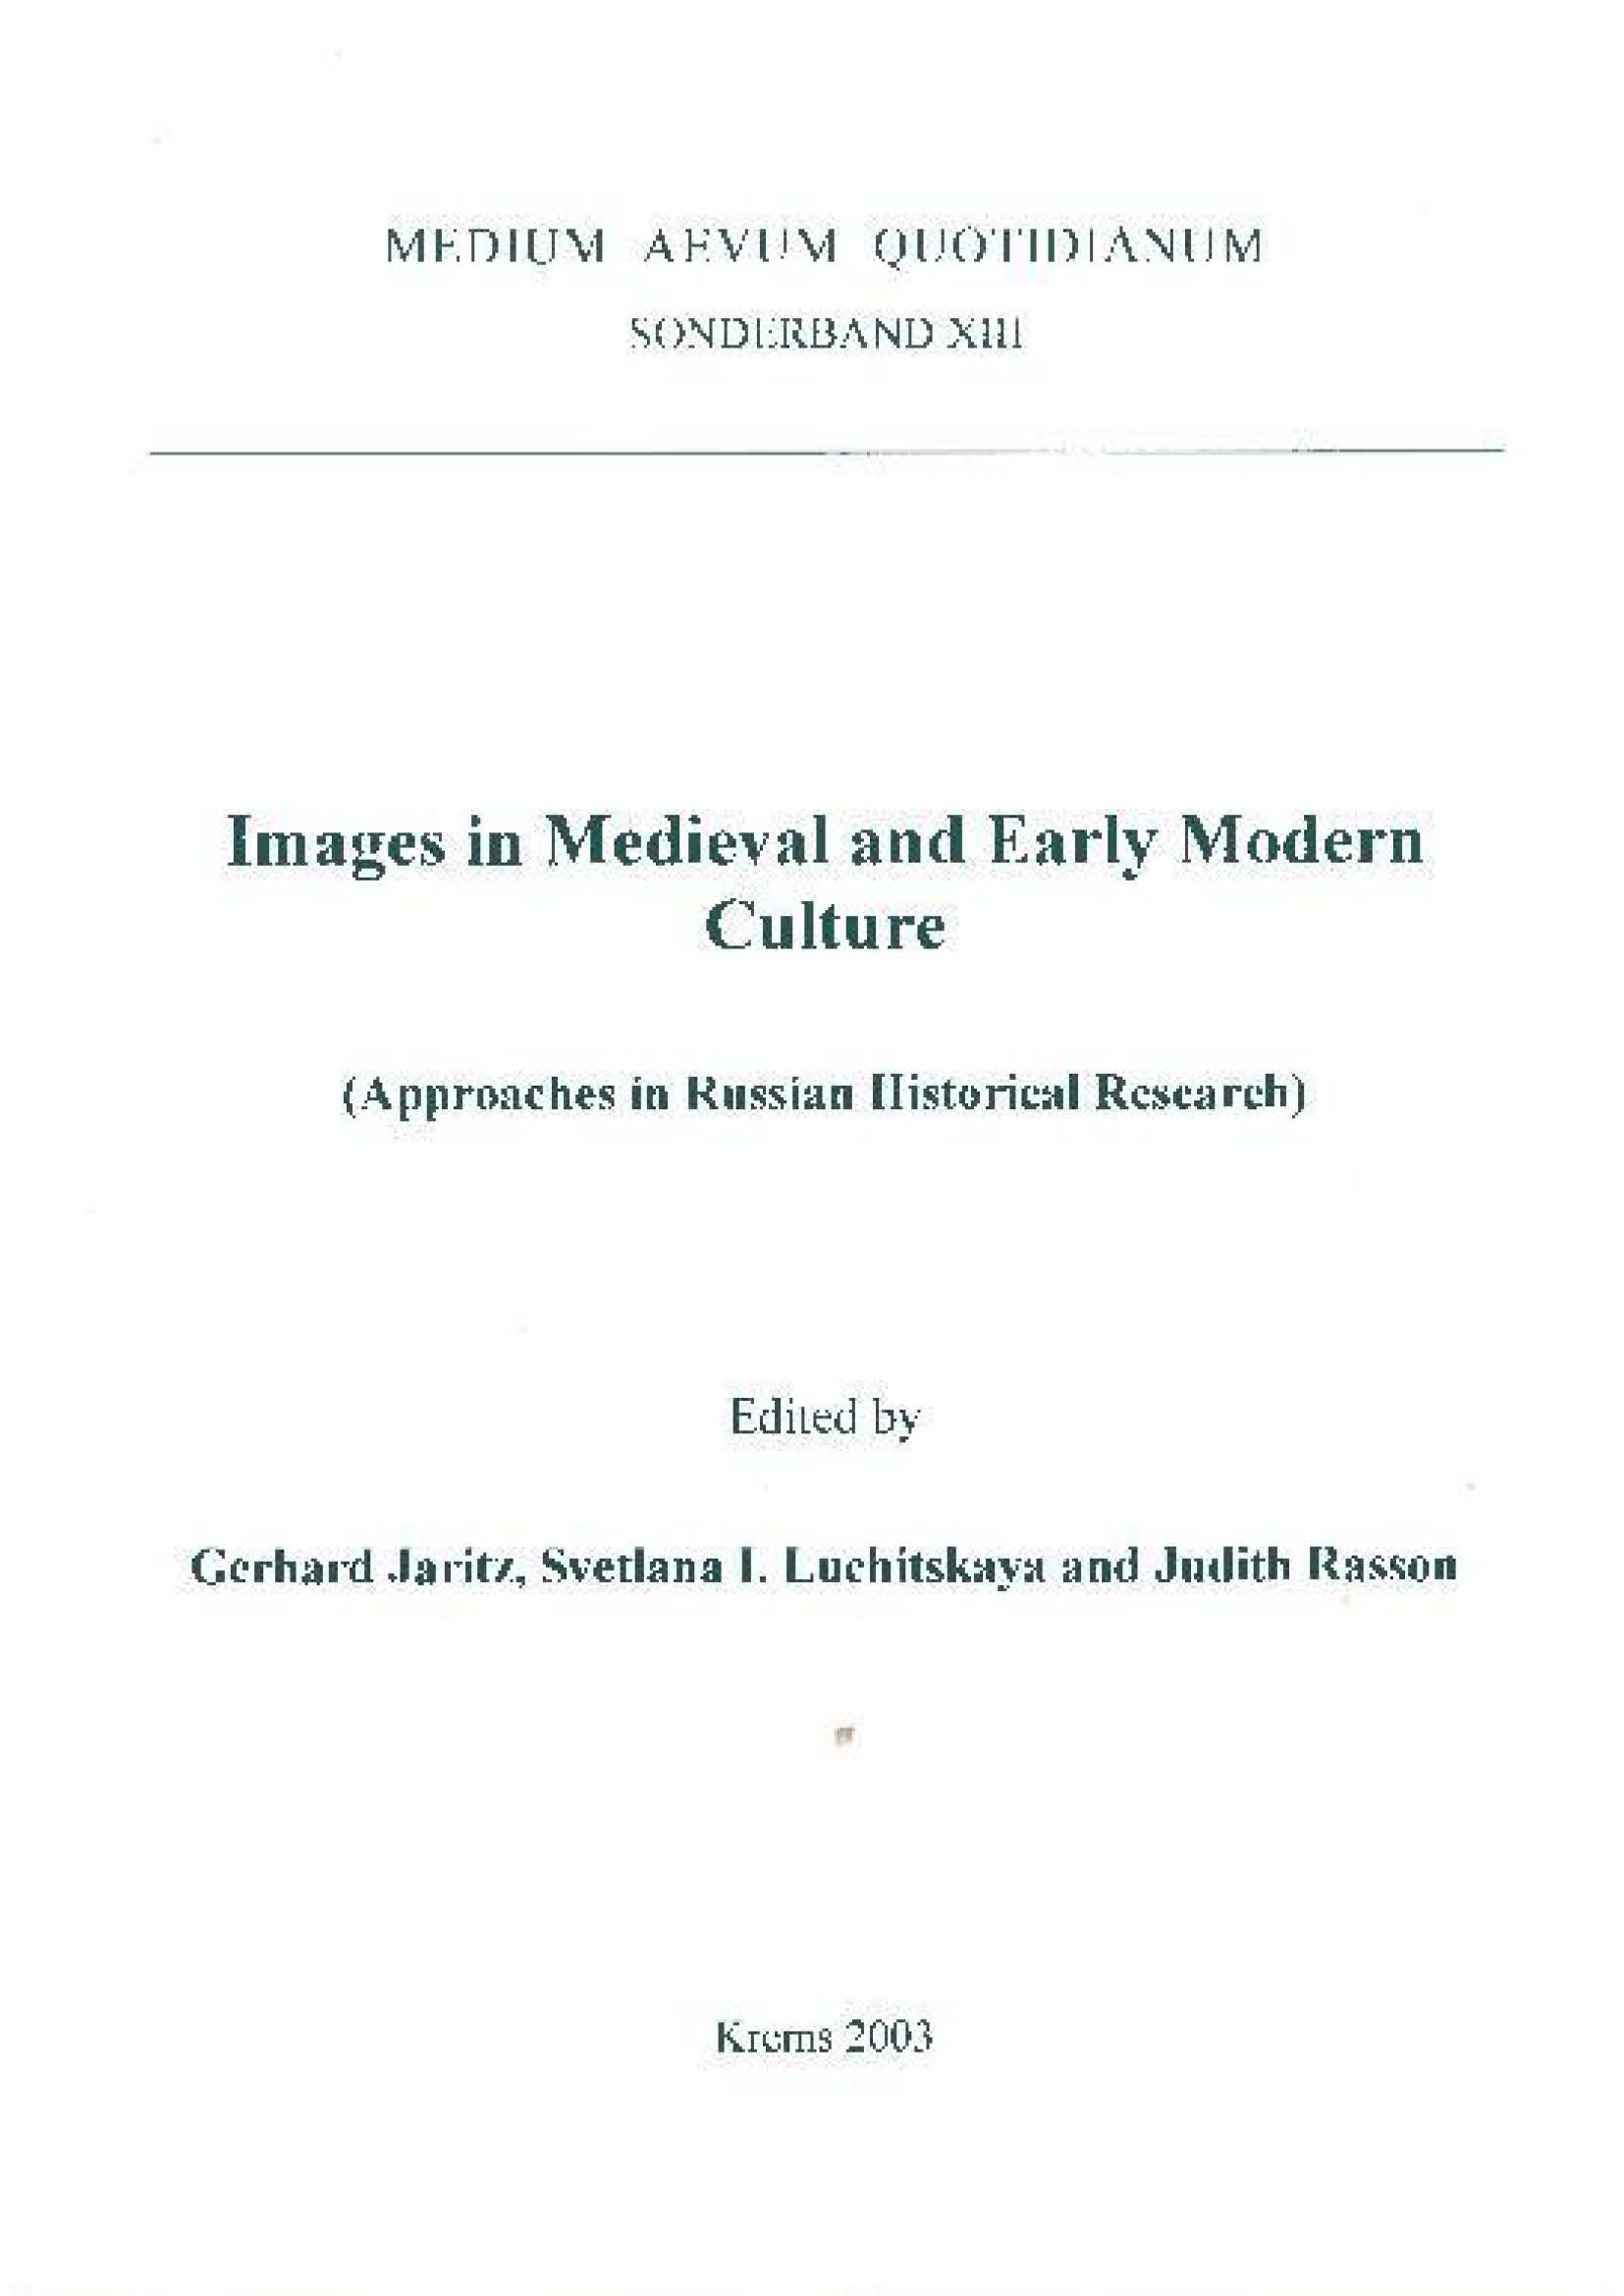 Images in Medieval and Early Modern Culture